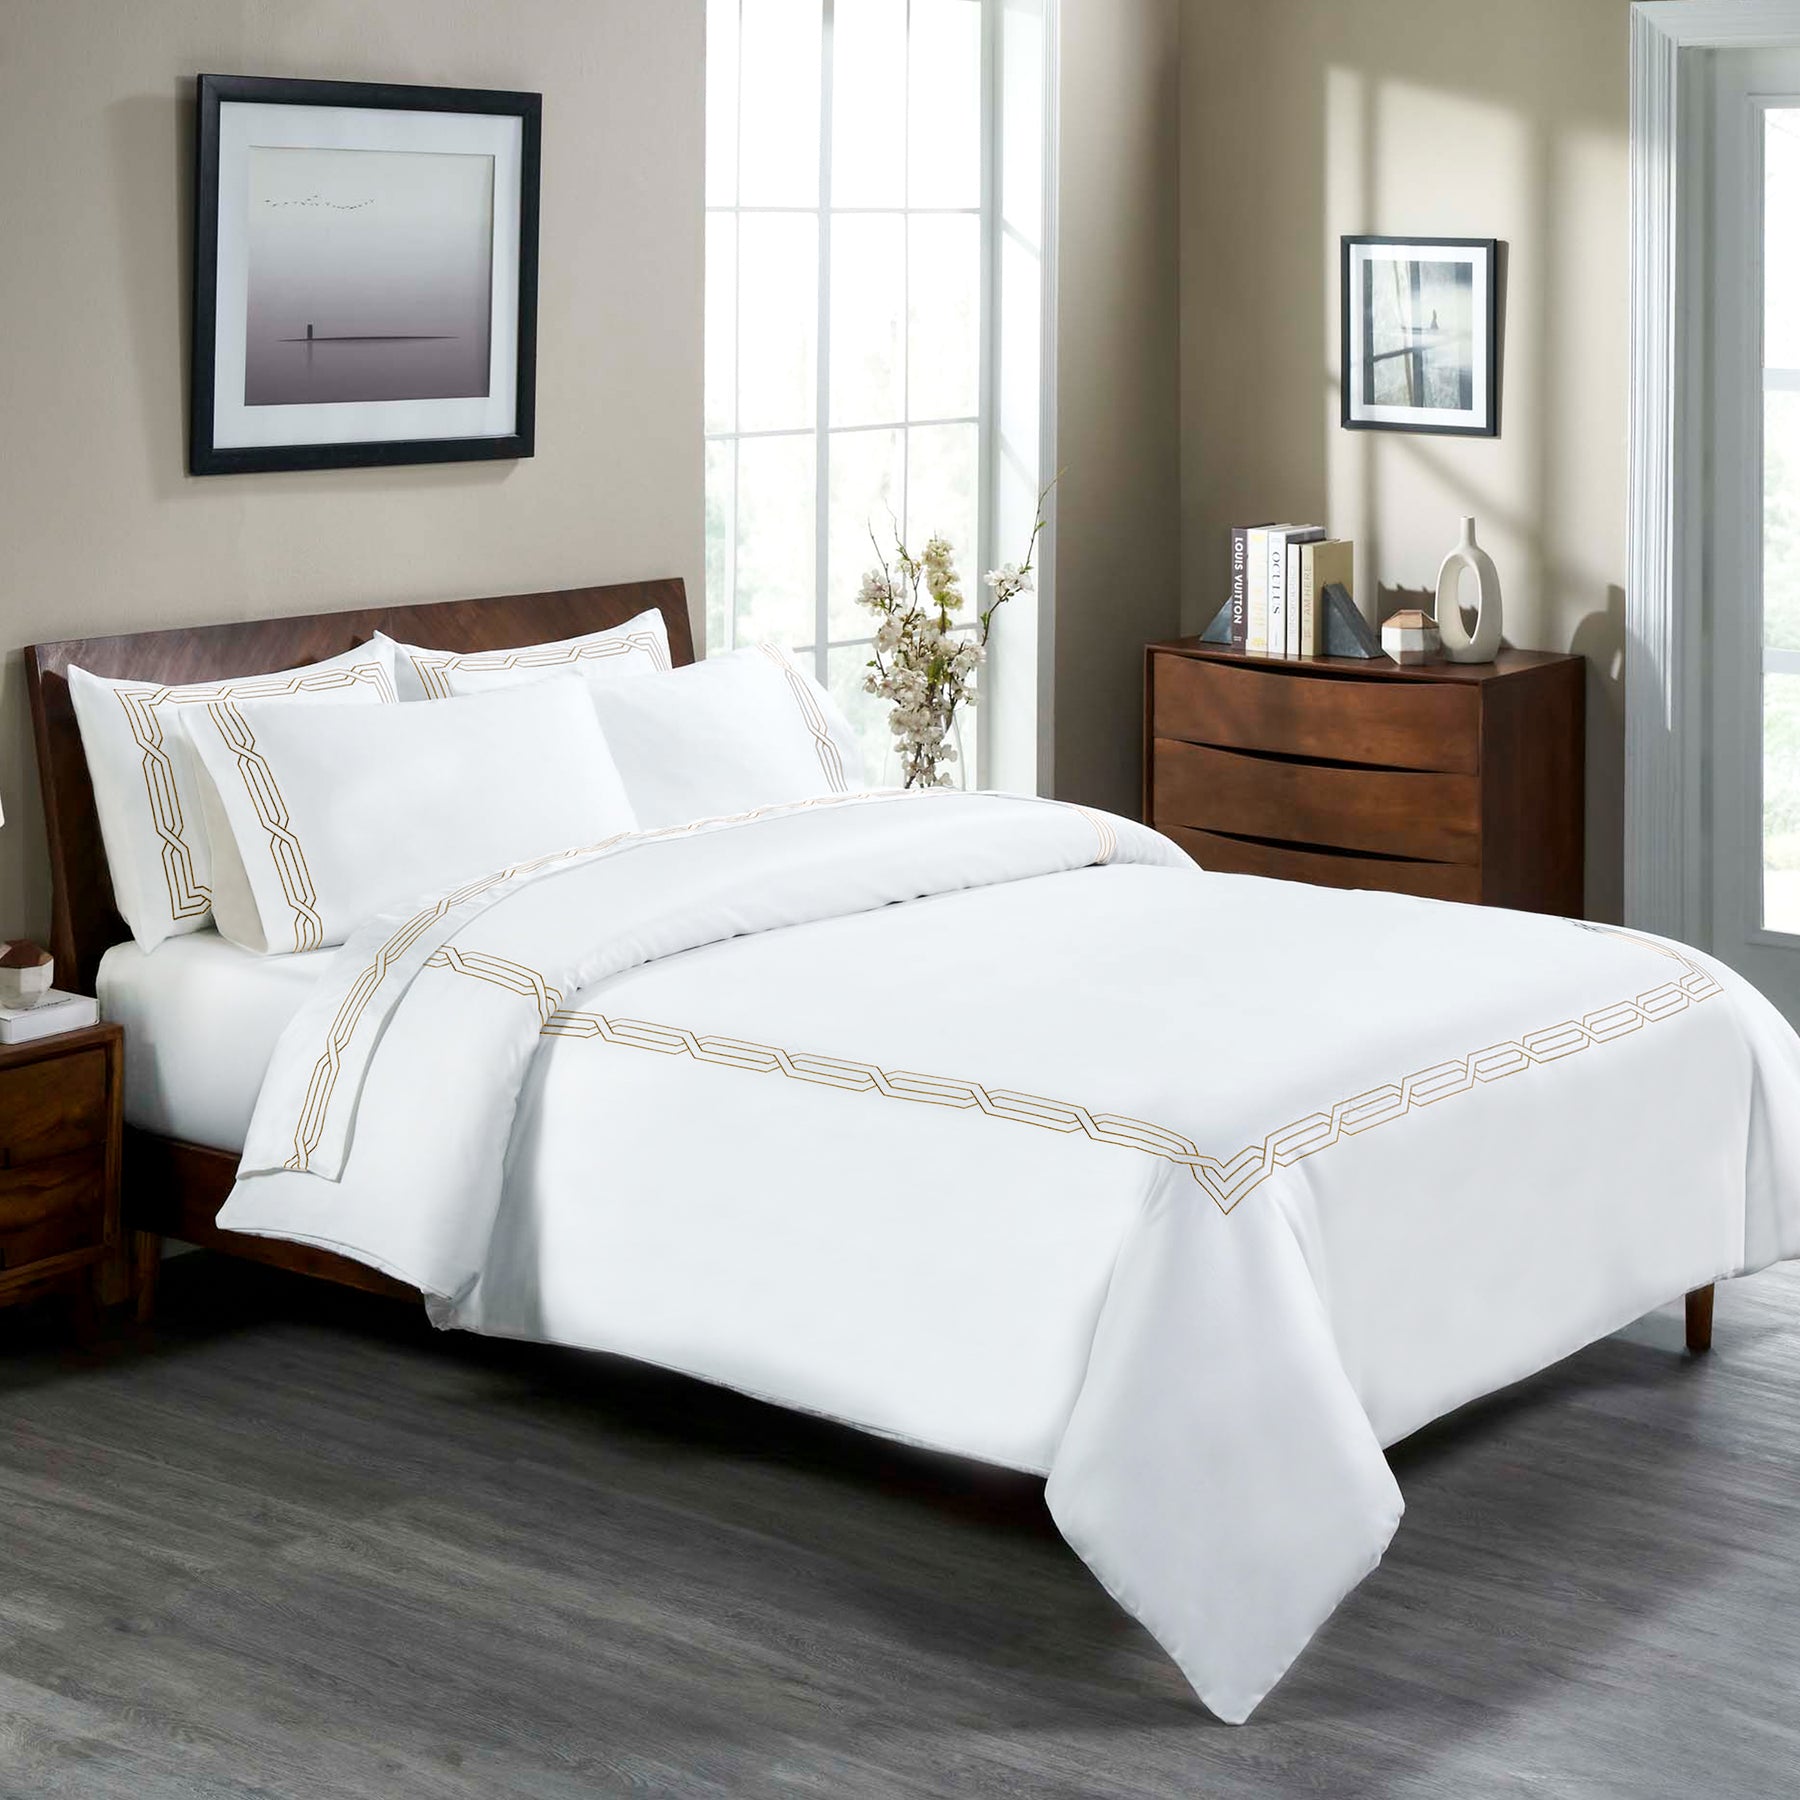 Superior Egyptian Cotton 1200 Thread Count Embroidered Geometric Scroll Duvet Cover Set  - White- Taupe